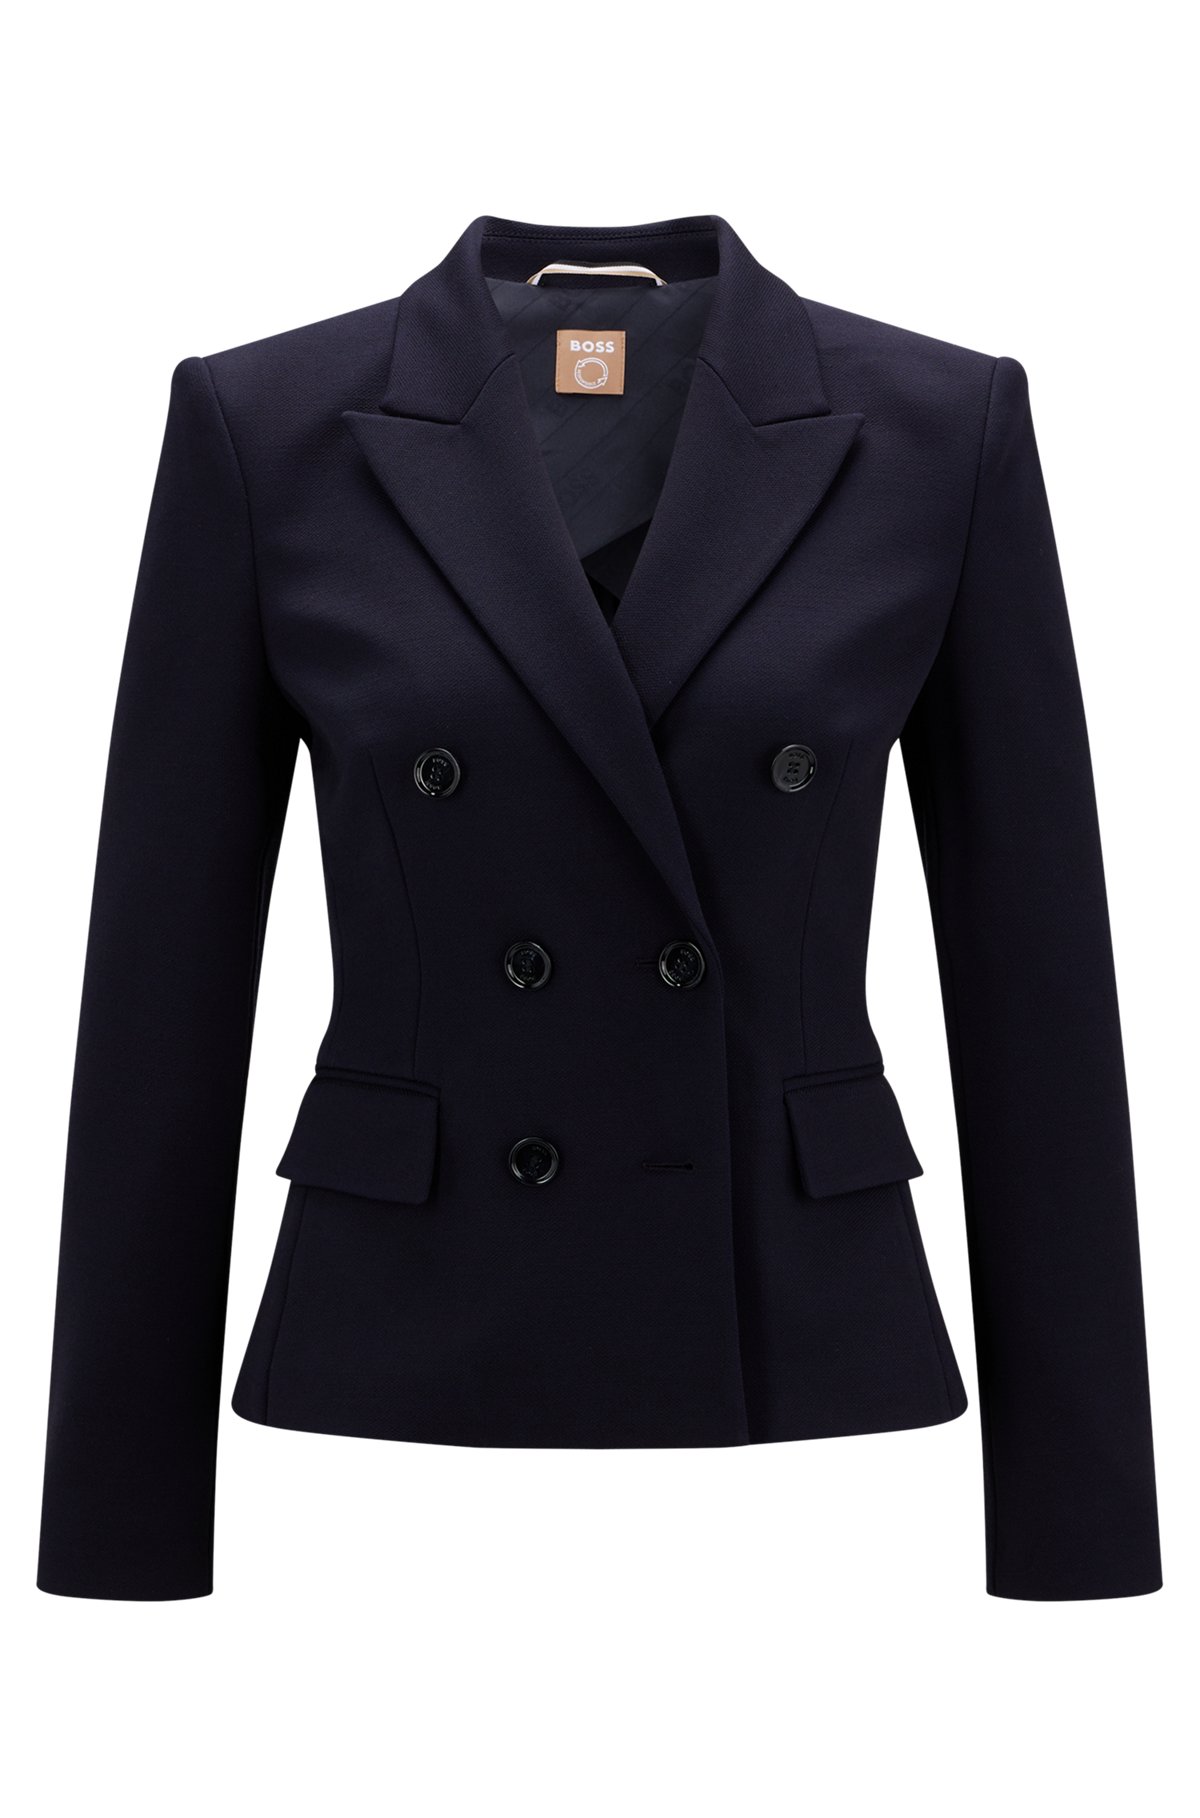 BOSS - Regular-fit double-breasted jacket fabric